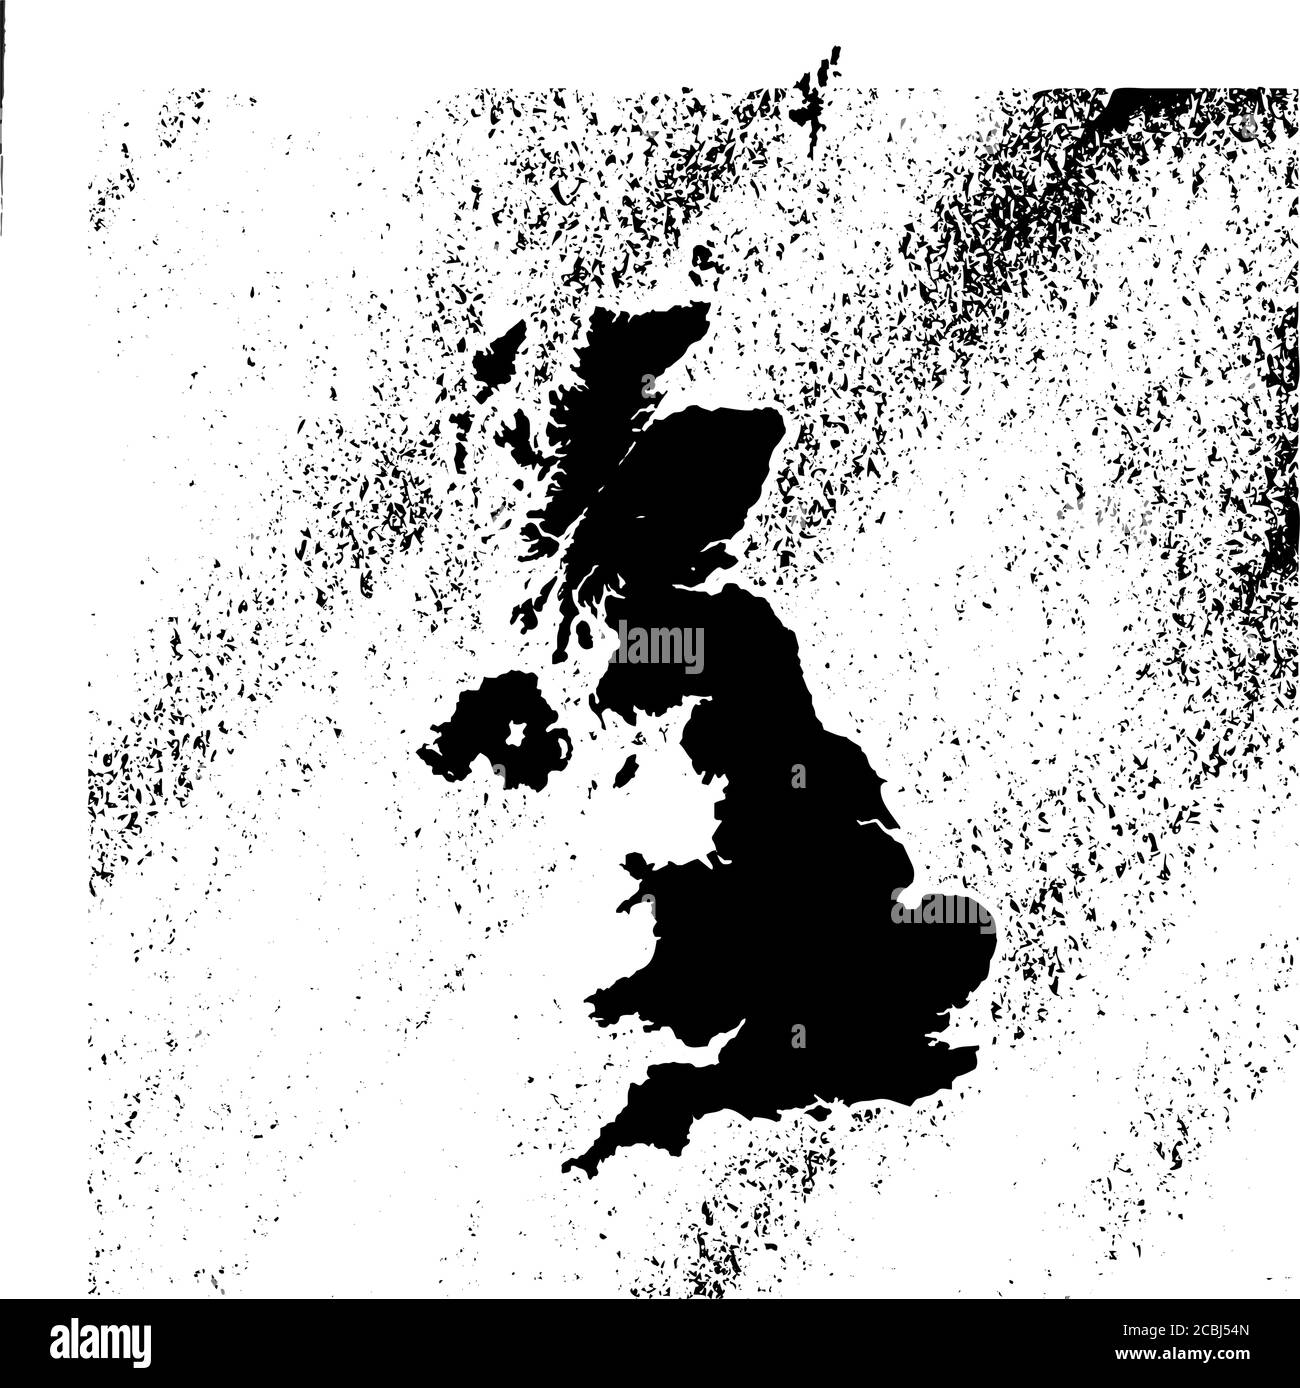 UK map on vintage background. Black and white hand drawn illustration. Icon sign for print and labelling. Stock Vector